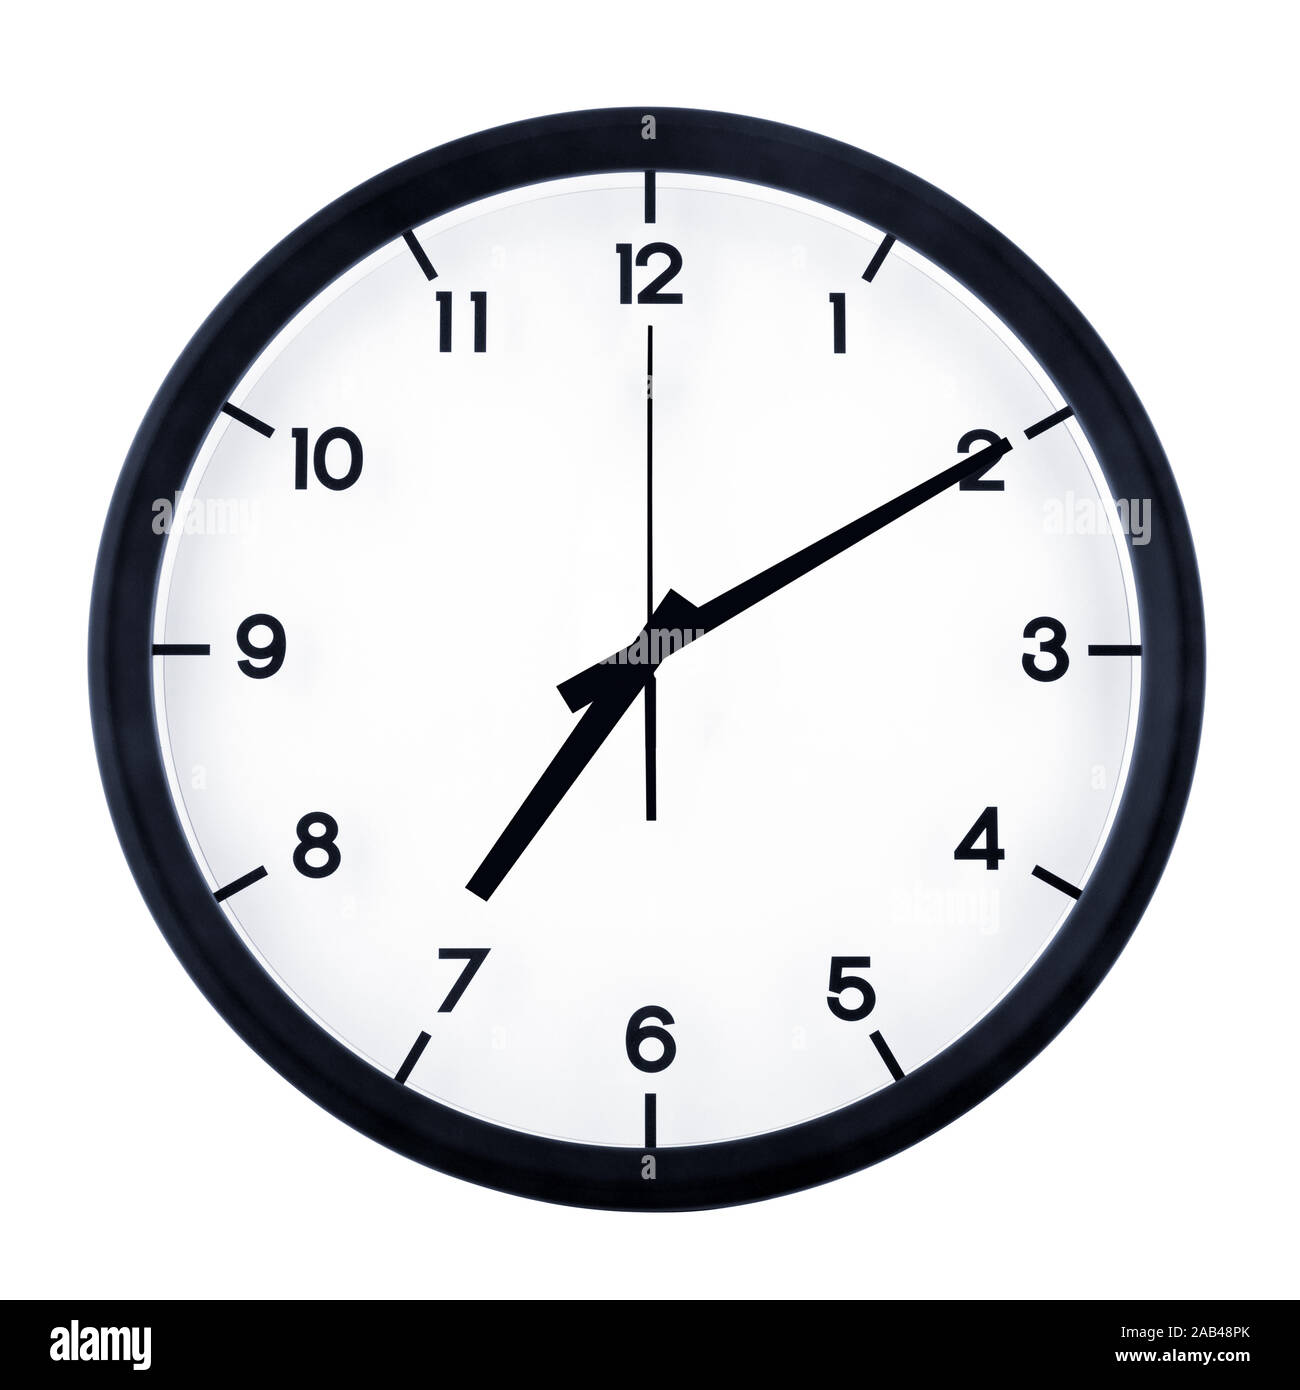 Classic analog clock pointing at seven ten, isolated on white background  Stock Photo - Alamy